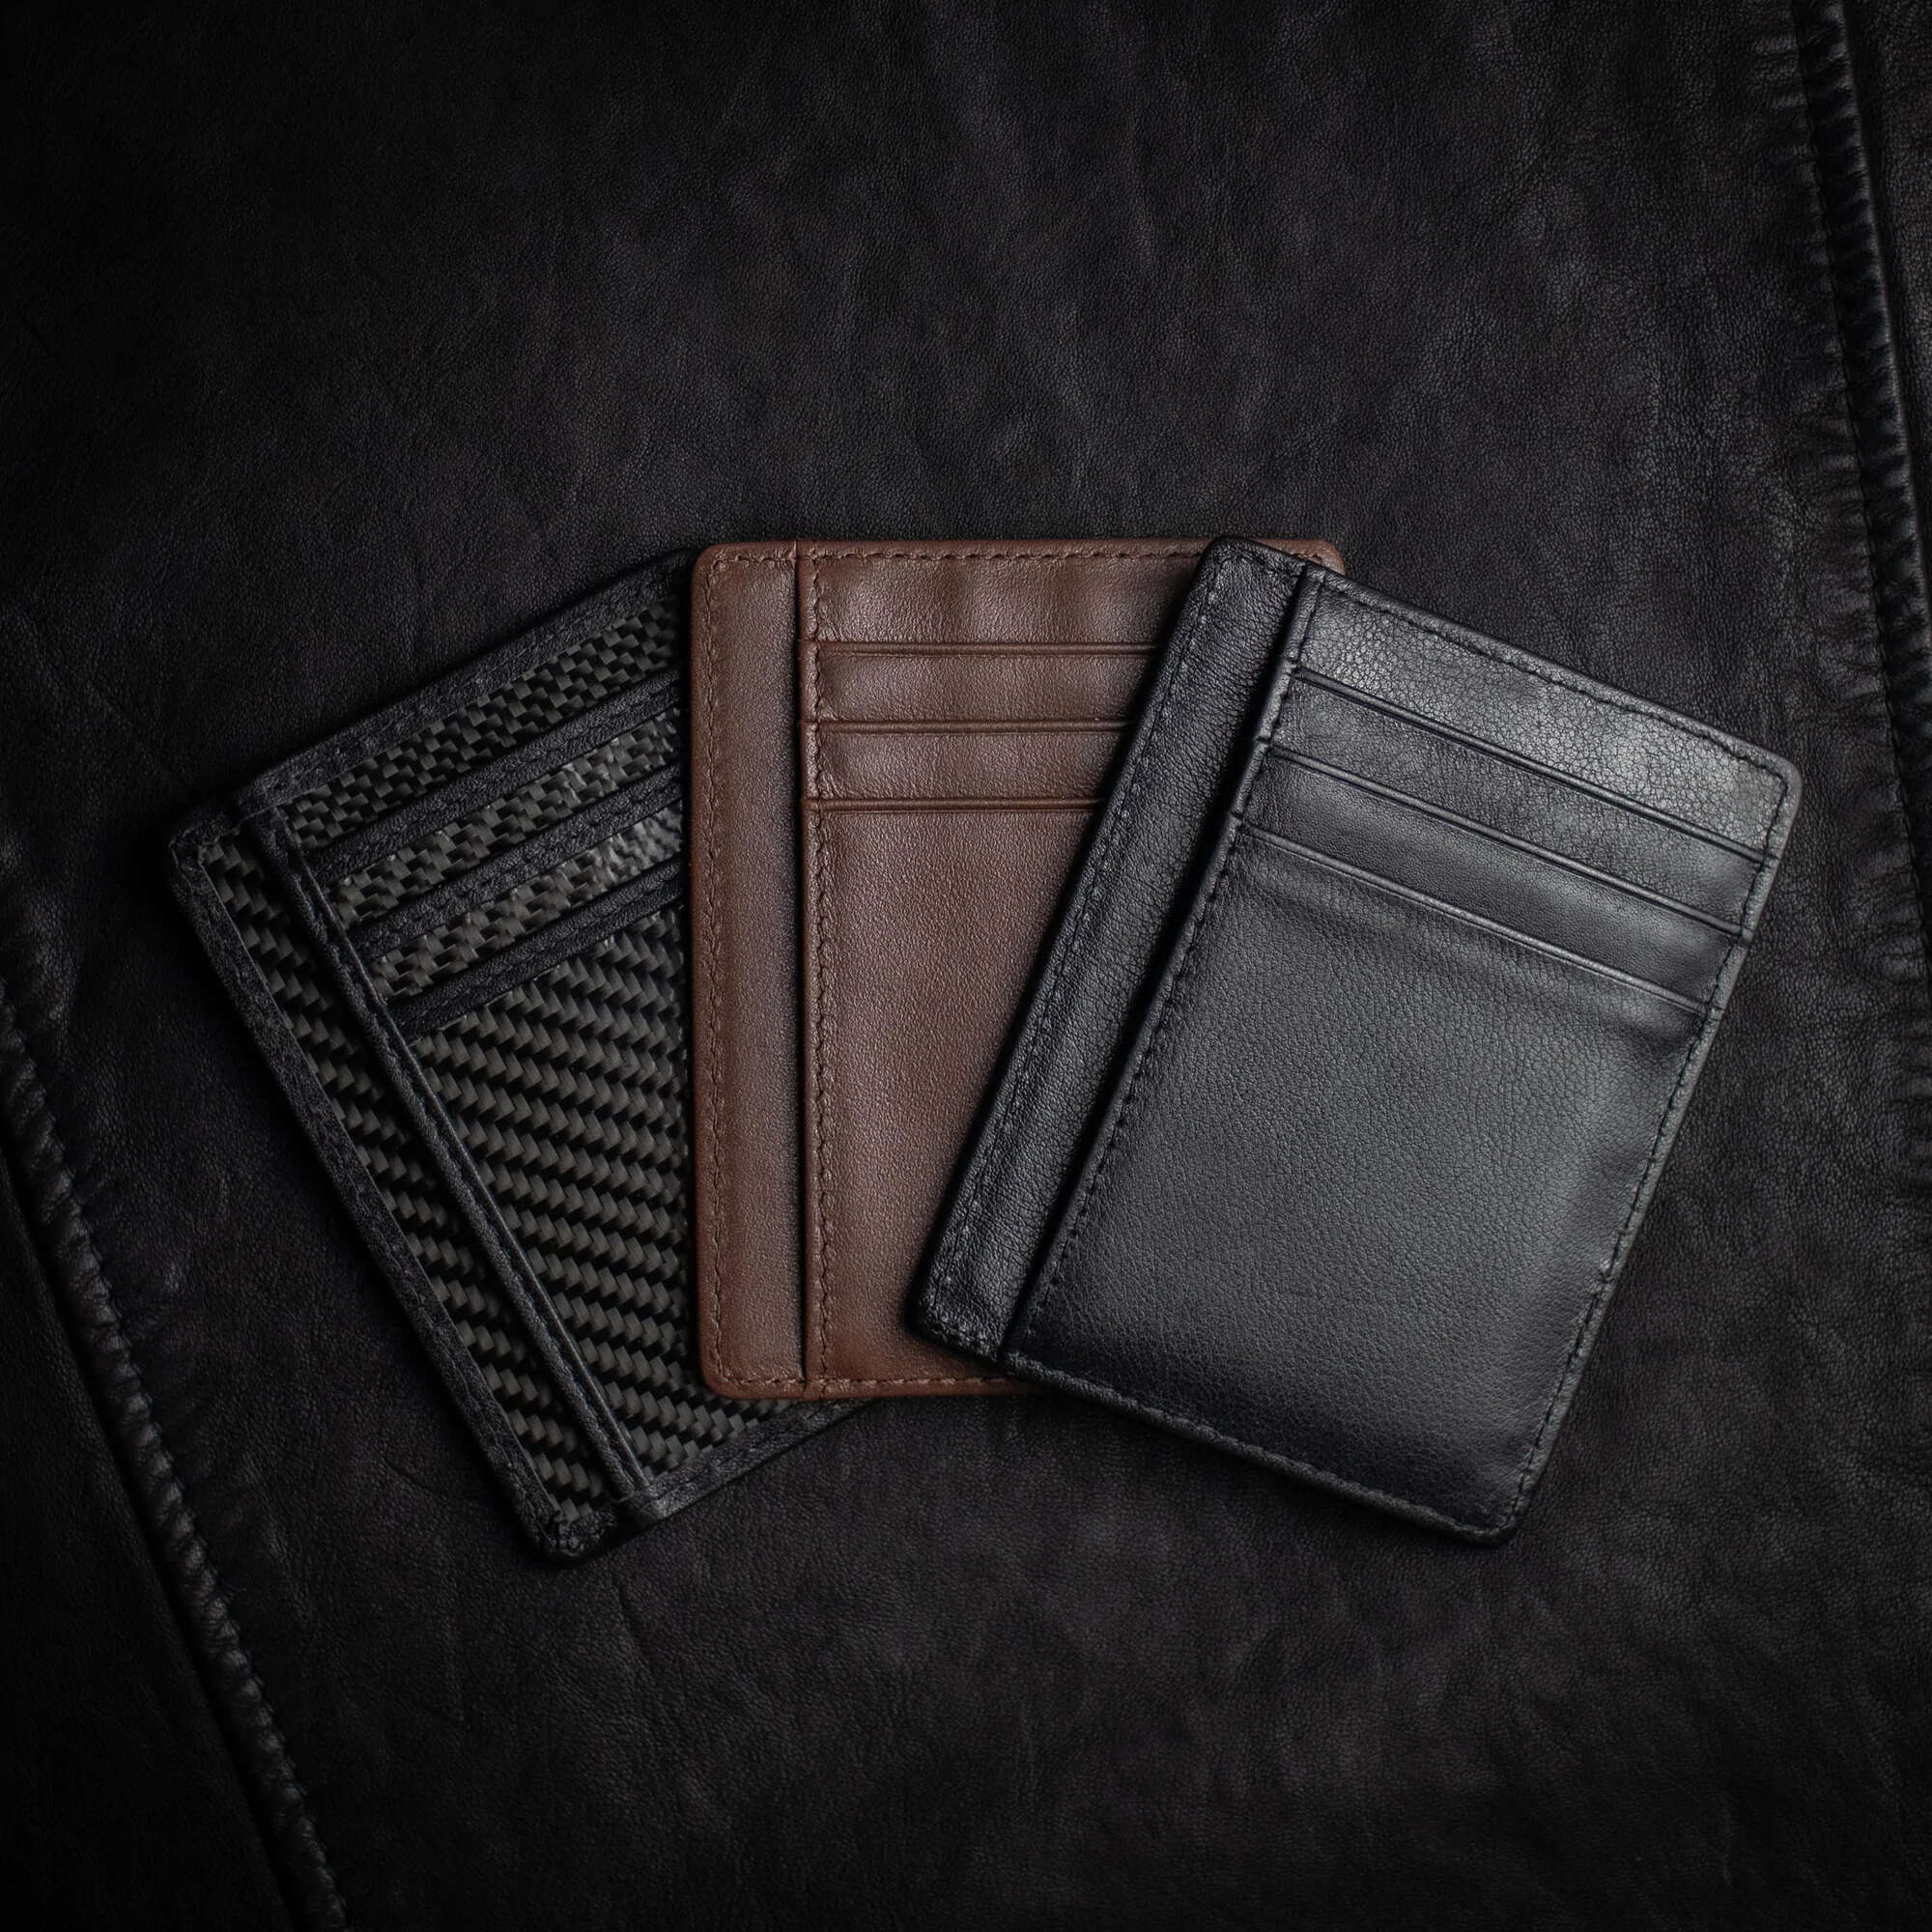 All versions of Shadow Wallet by Dee Christopher on black surface